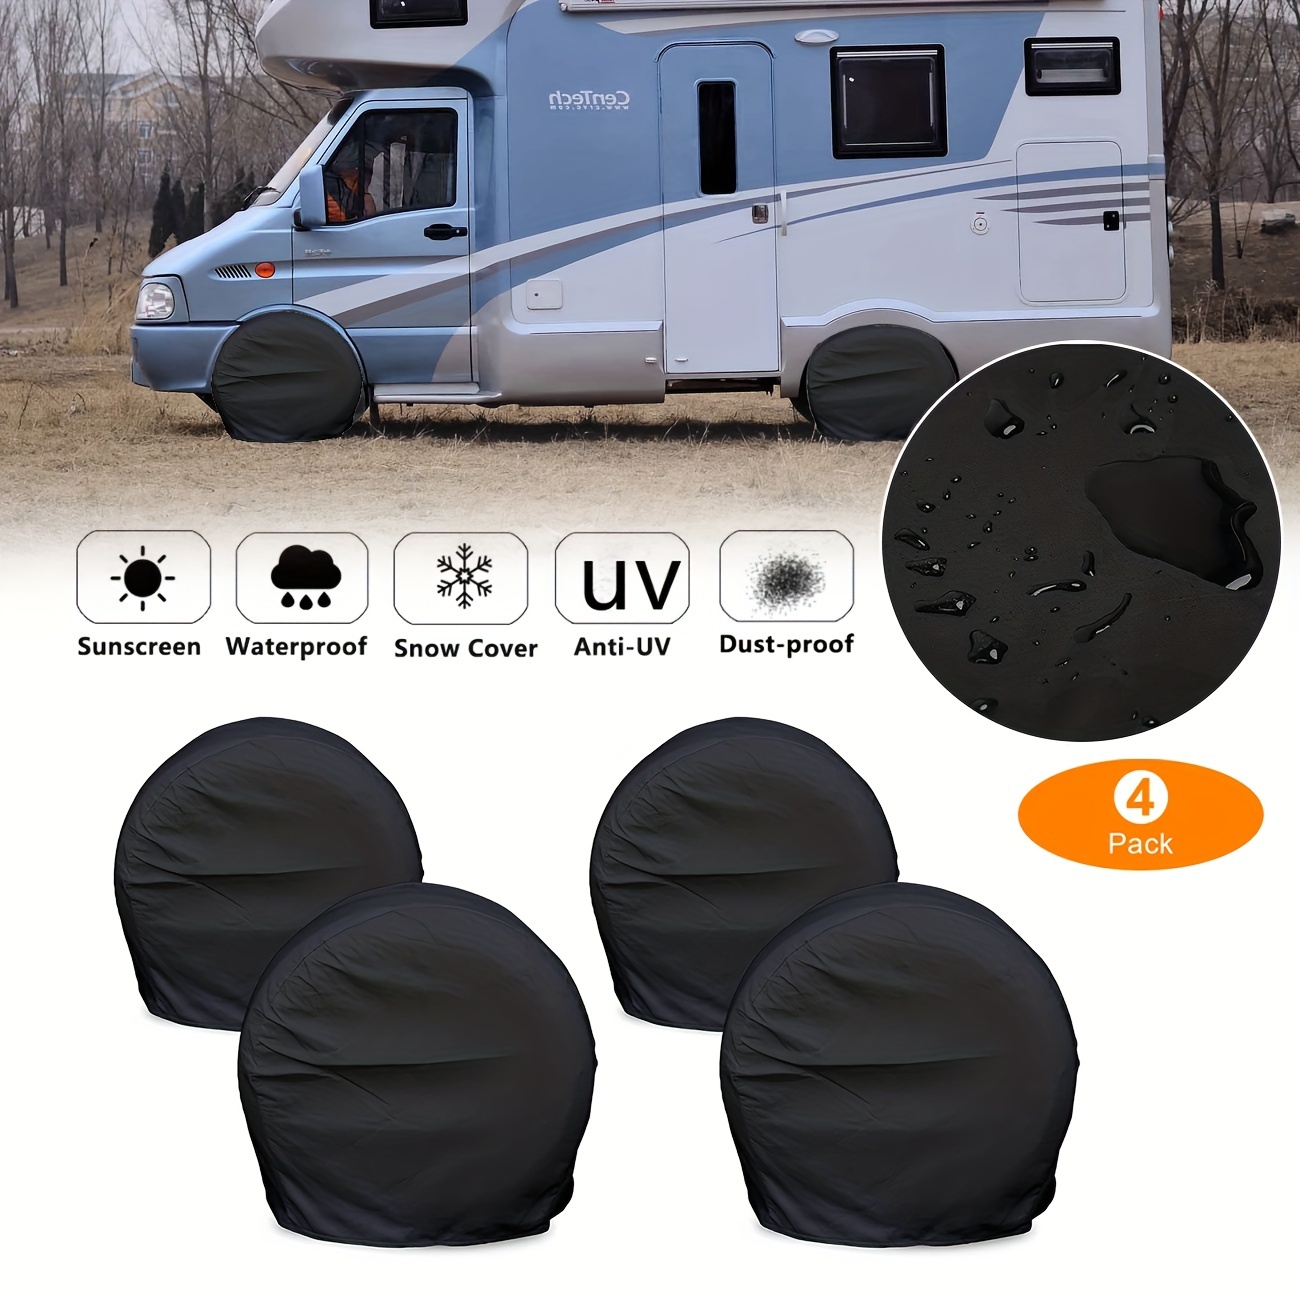 

4pcs Black Tire Cover Waterproof Wheel Cover Tire Protector For Truck, Suv, Trailer, Camper